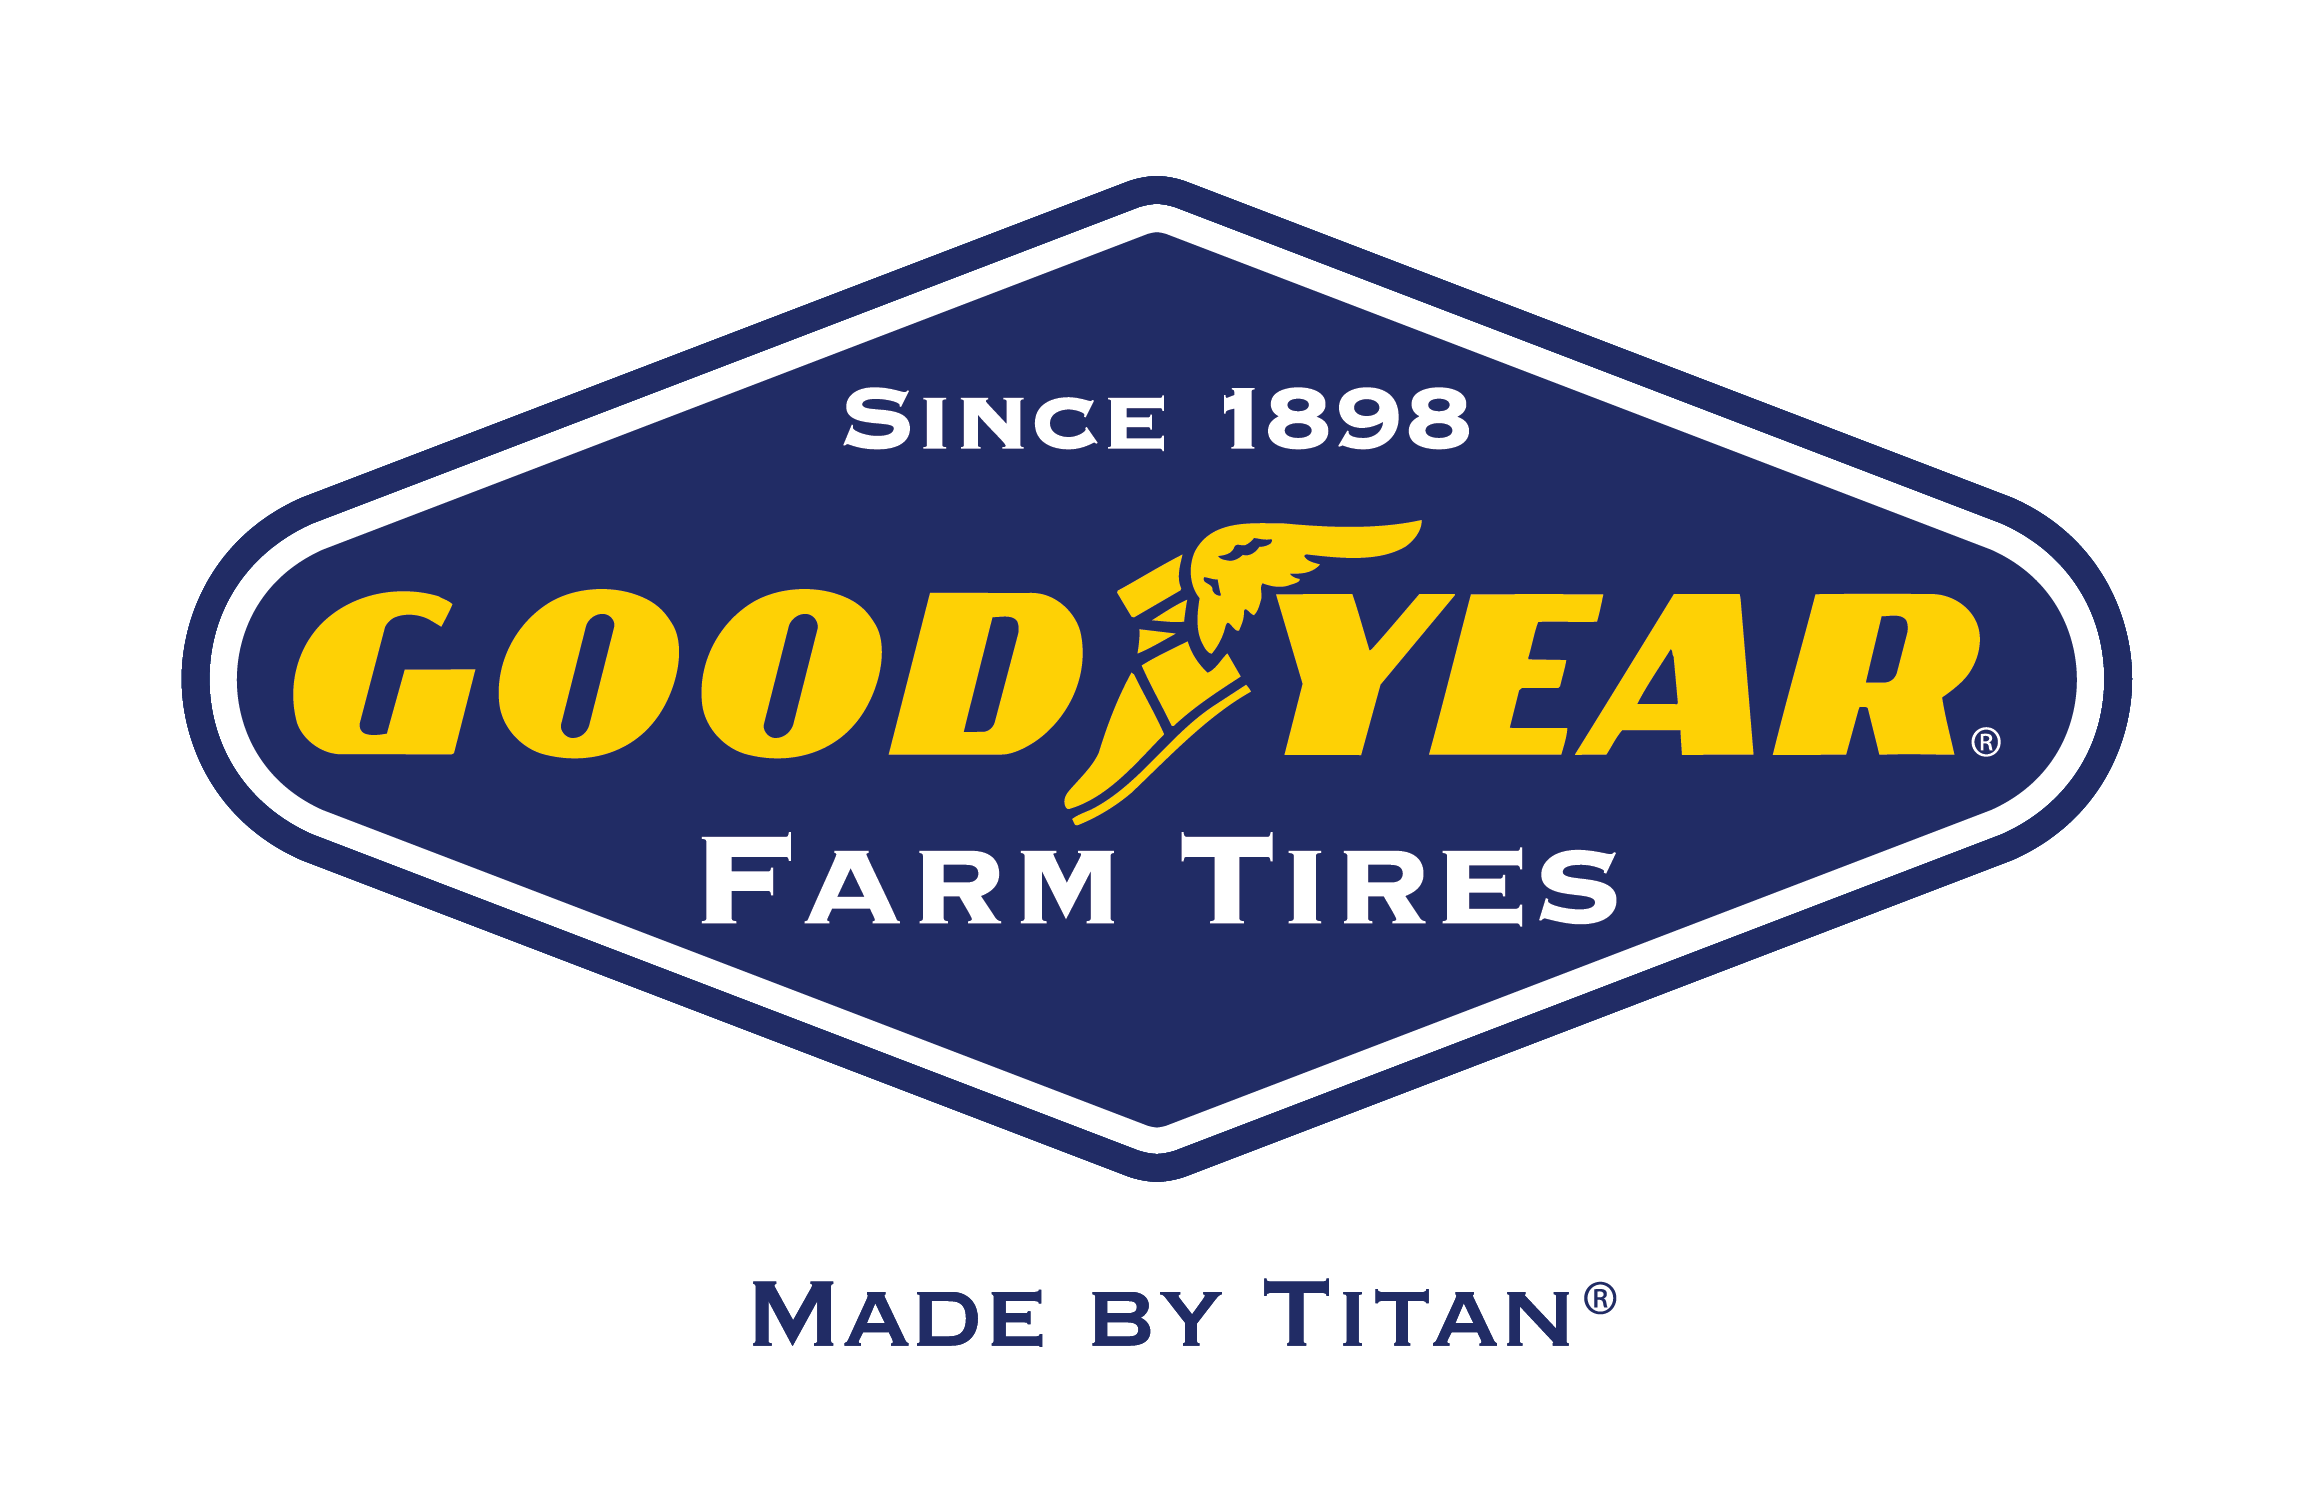 Goodyear company. Гудиер шины лого. Goodyear шины логотип. Goodyear Tire and Rubber Company. Goodyear logo 2021.